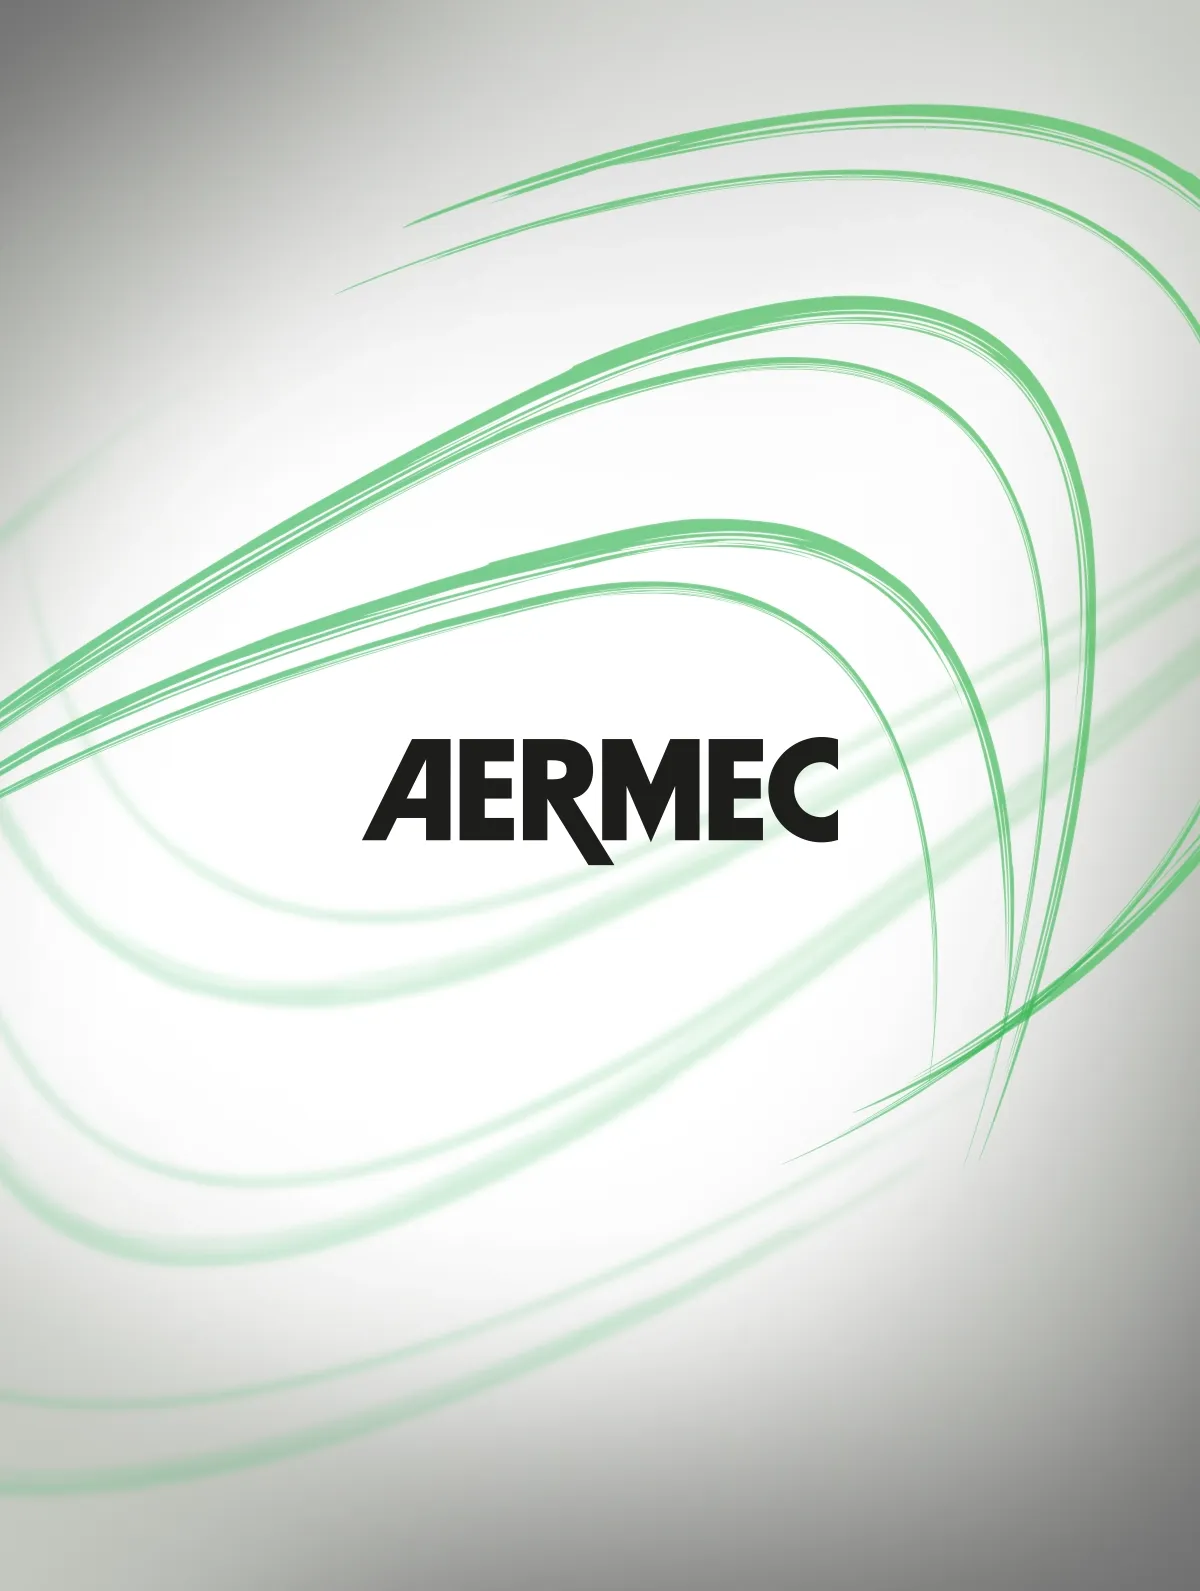 Aermec - A nation-wide campaign to tell the 'heart of Aermec. - By HDG